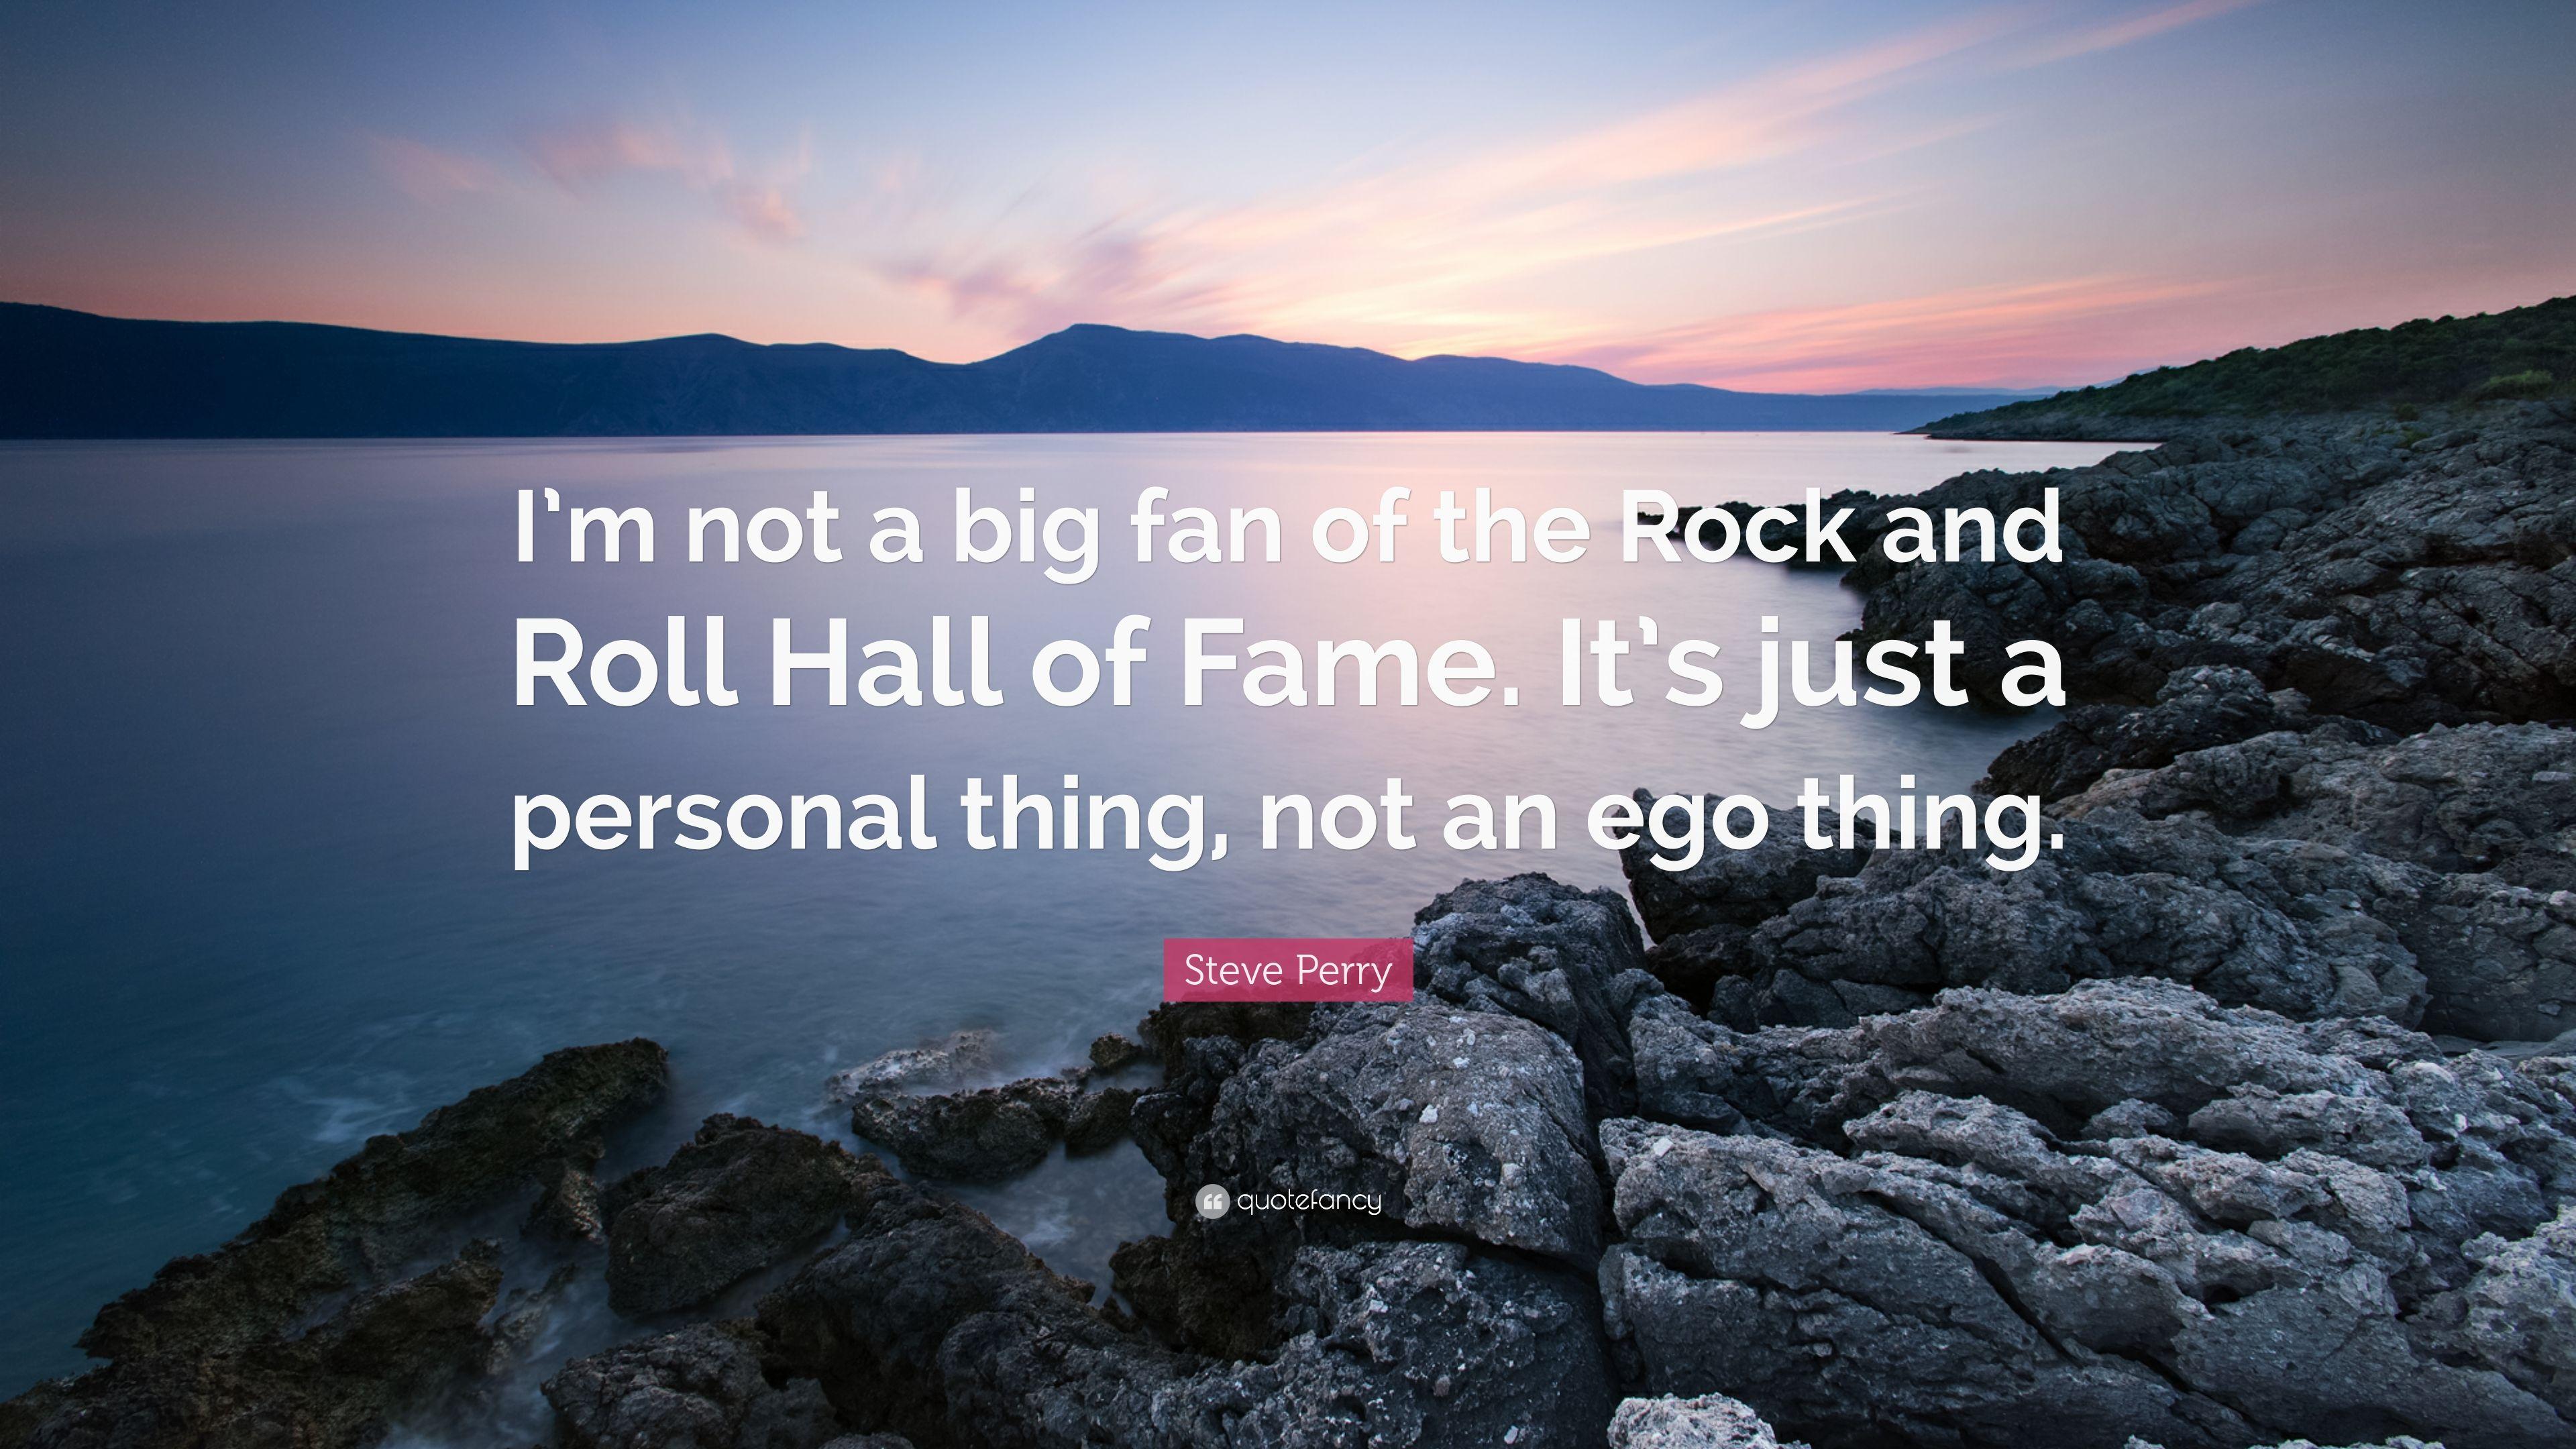 Steve Perry Quote: “I'm not a big fan of the Rock and Roll Hall